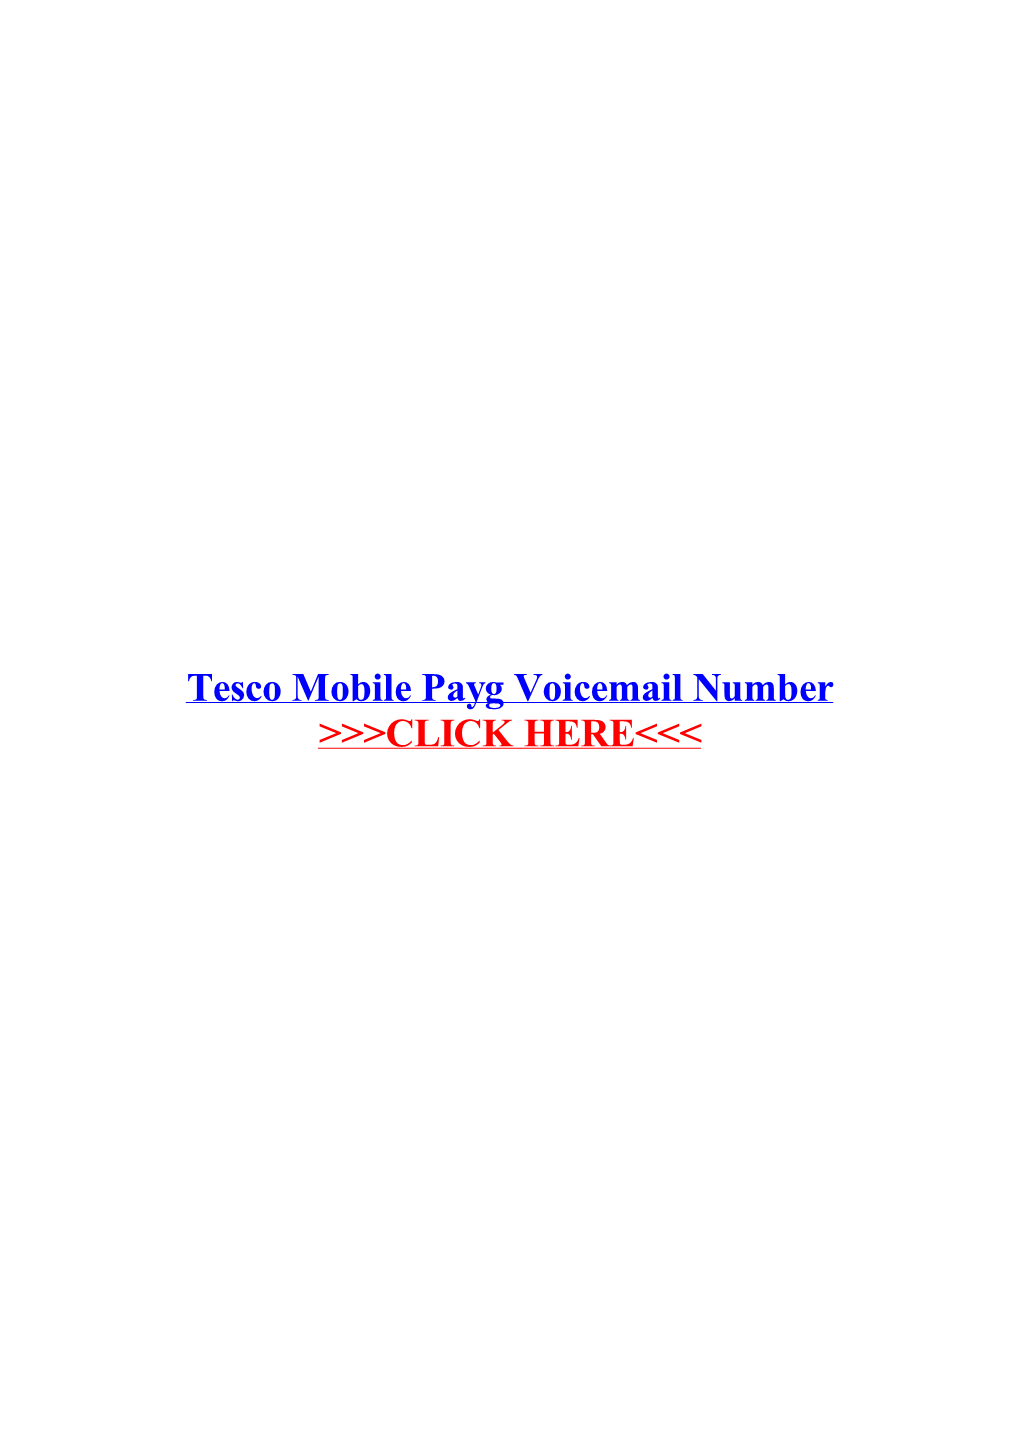 Tesco Mobile Payg Voicemail Number